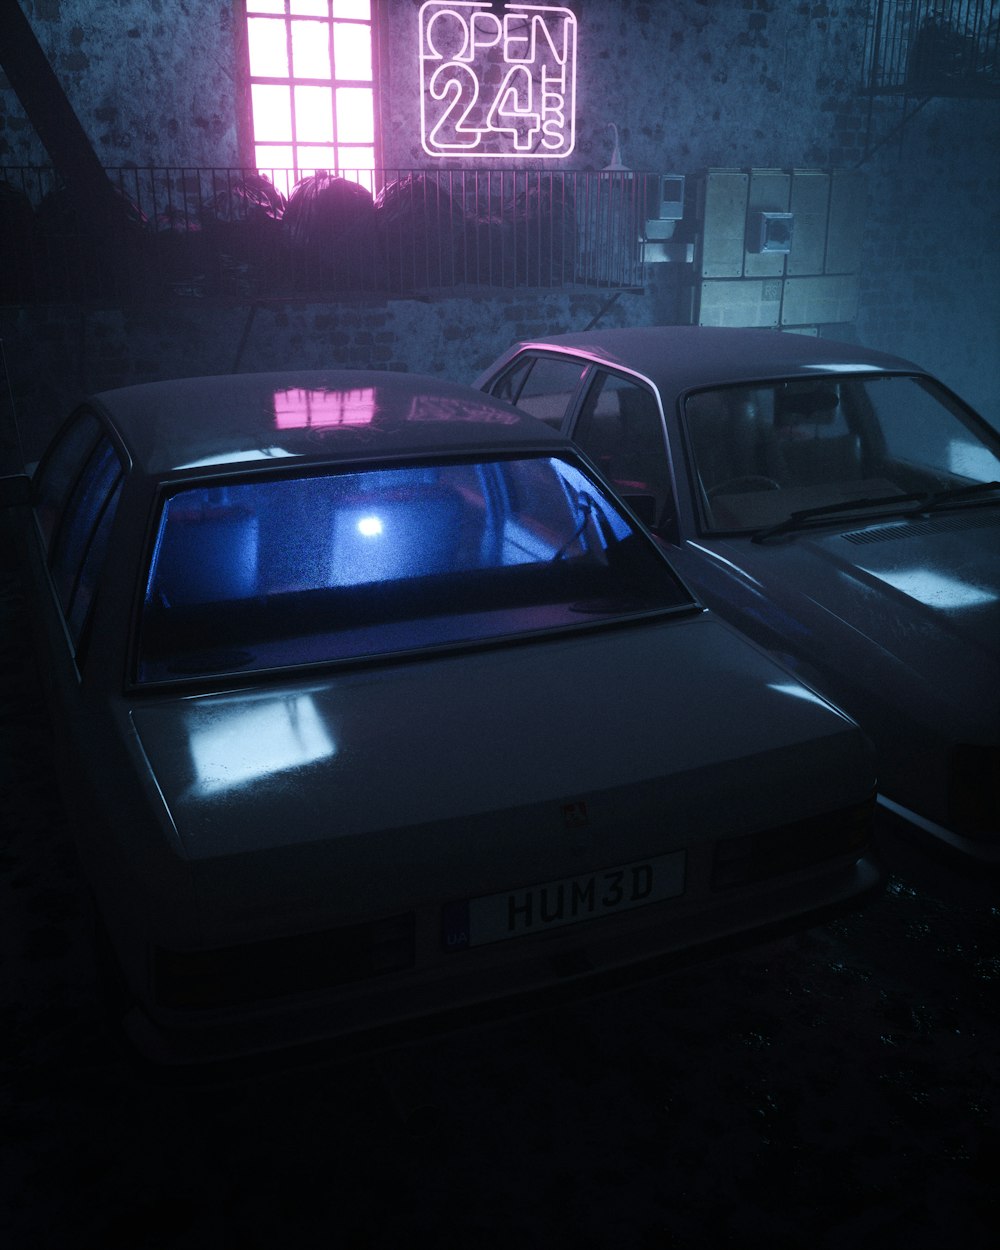 two cars parked in a dimly lit garage